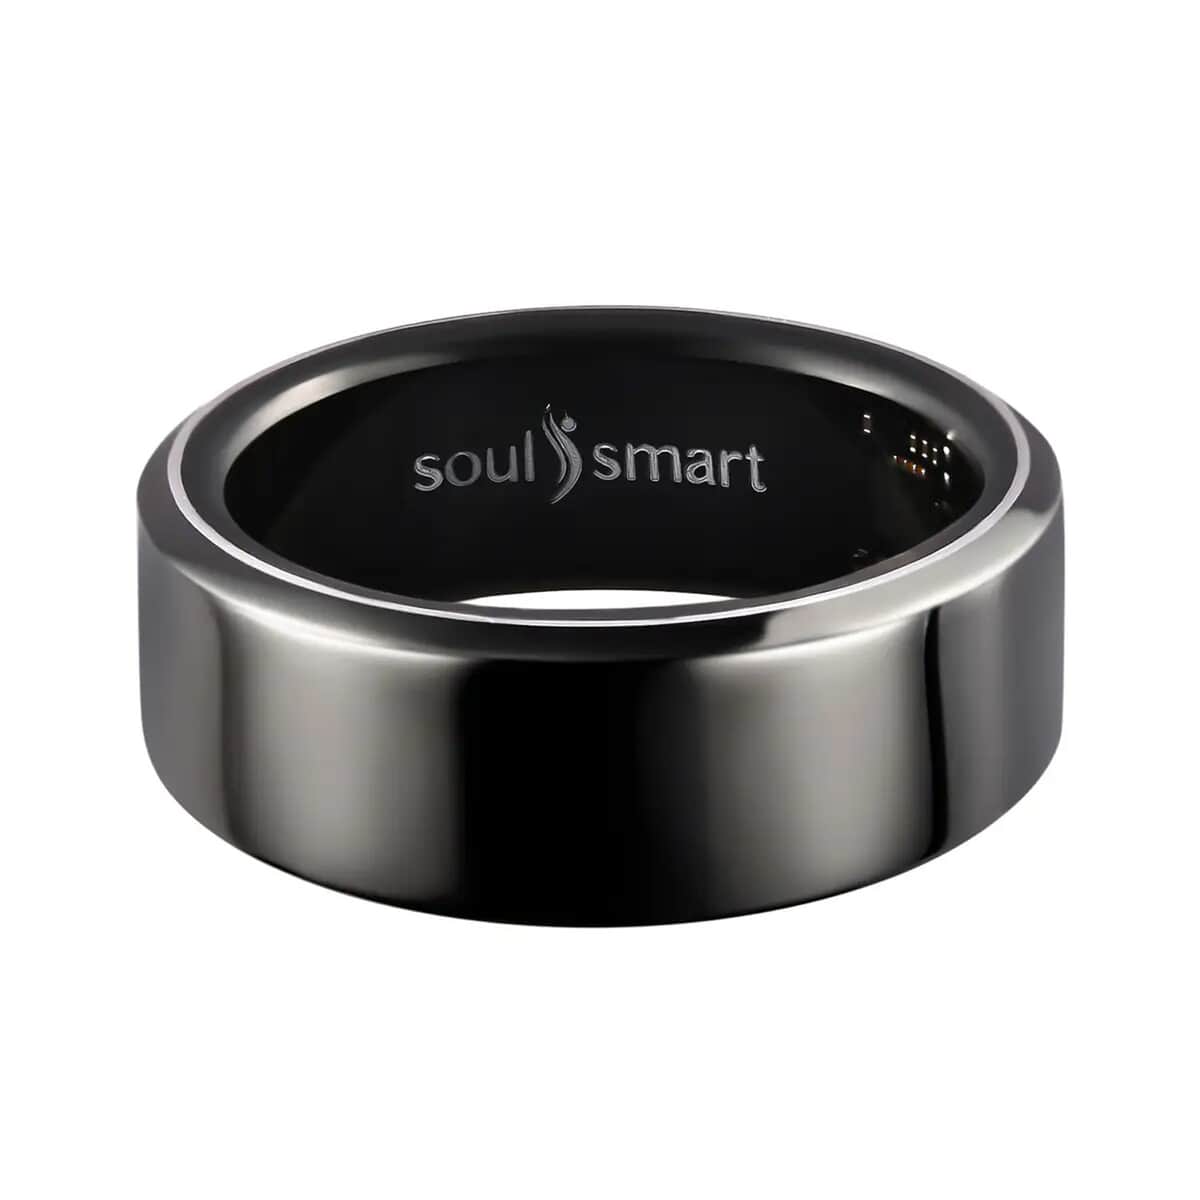 Soulsmart Multifunctional Health Tracker Smart Ring (Size 11.0) in ION Plated Black Stainless Steel (Compatible with Android 5.0+ & Apple IOS 10.0+ Systems) (Del. in 10-15 Days) image number 2